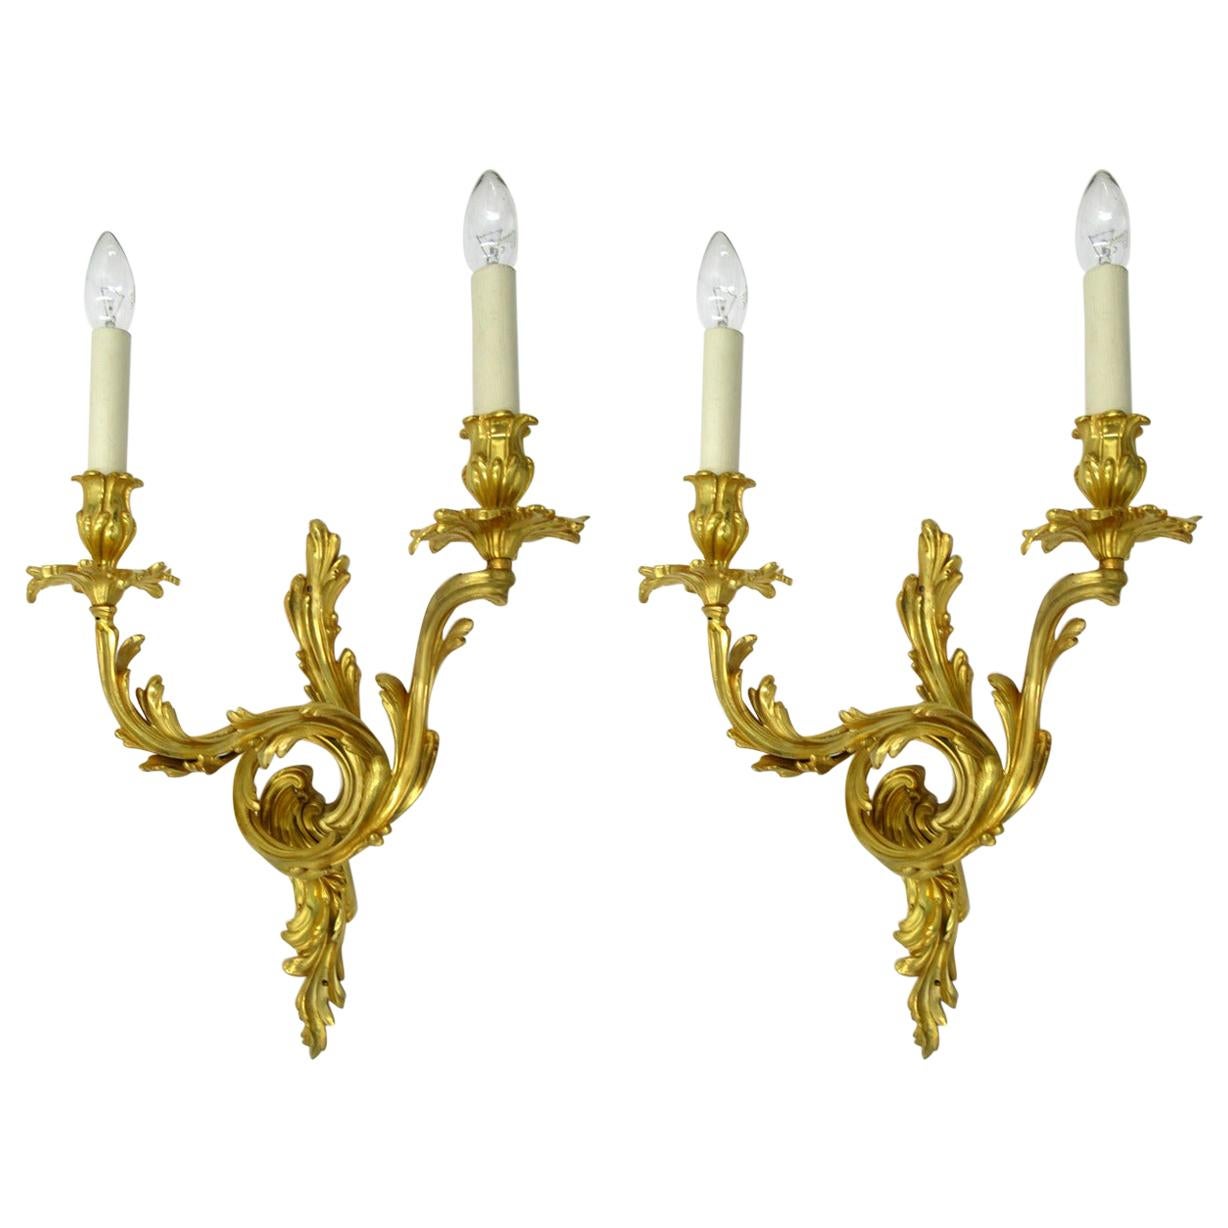 Antique Pair of Ormolu Gilt Bronze Twin Light Wall Candle Sconces Appliques 19Ct